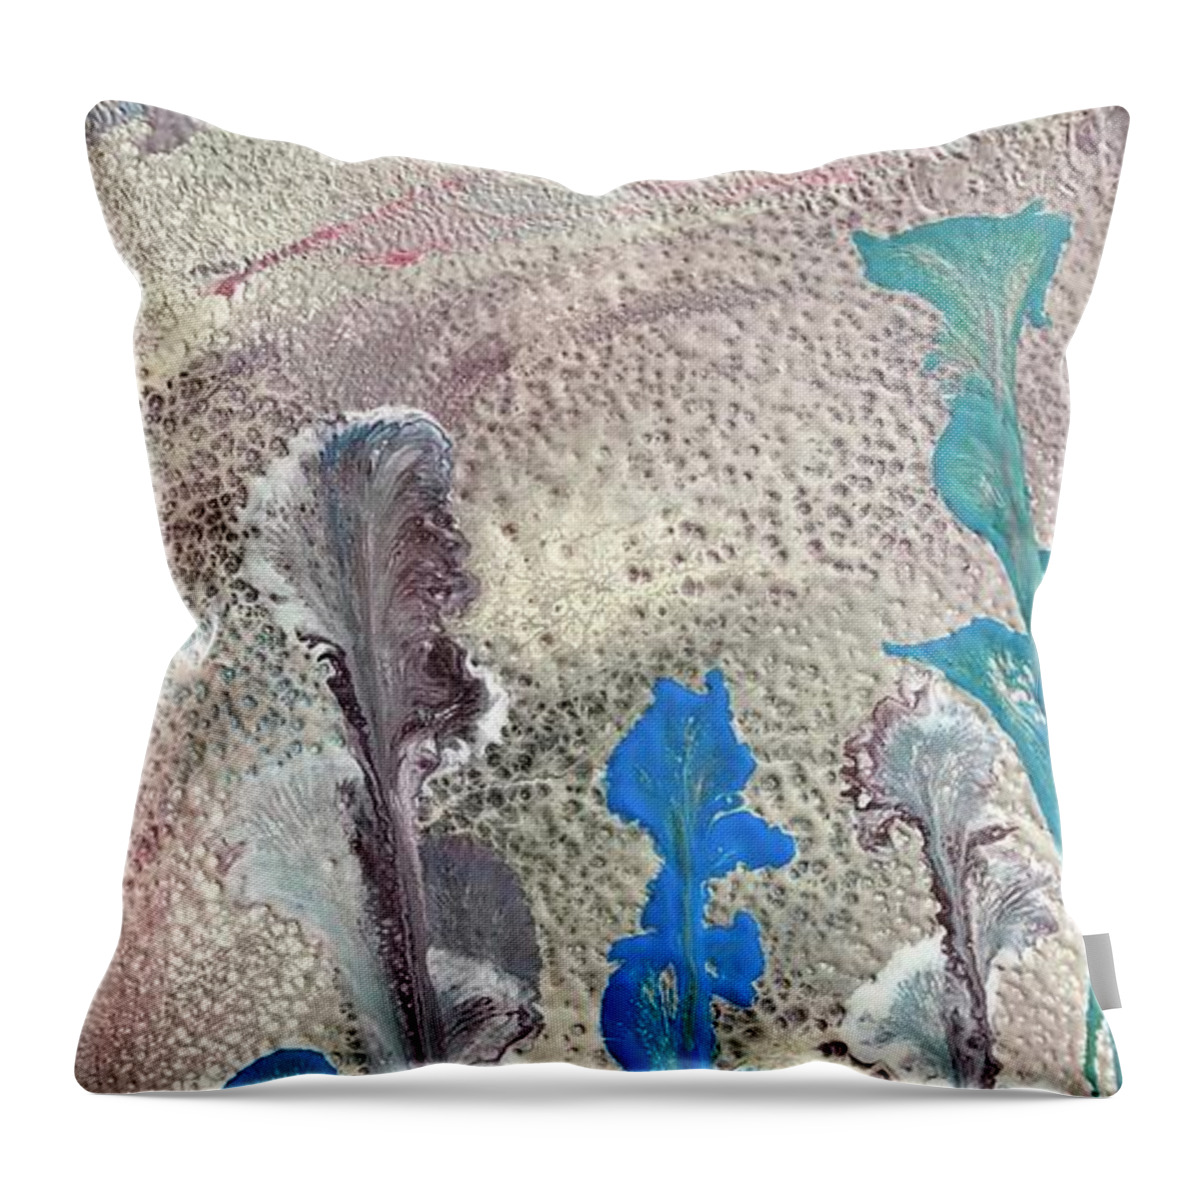 Acrylic Throw Pillow featuring the painting Ocean Life by Beverly Johnson